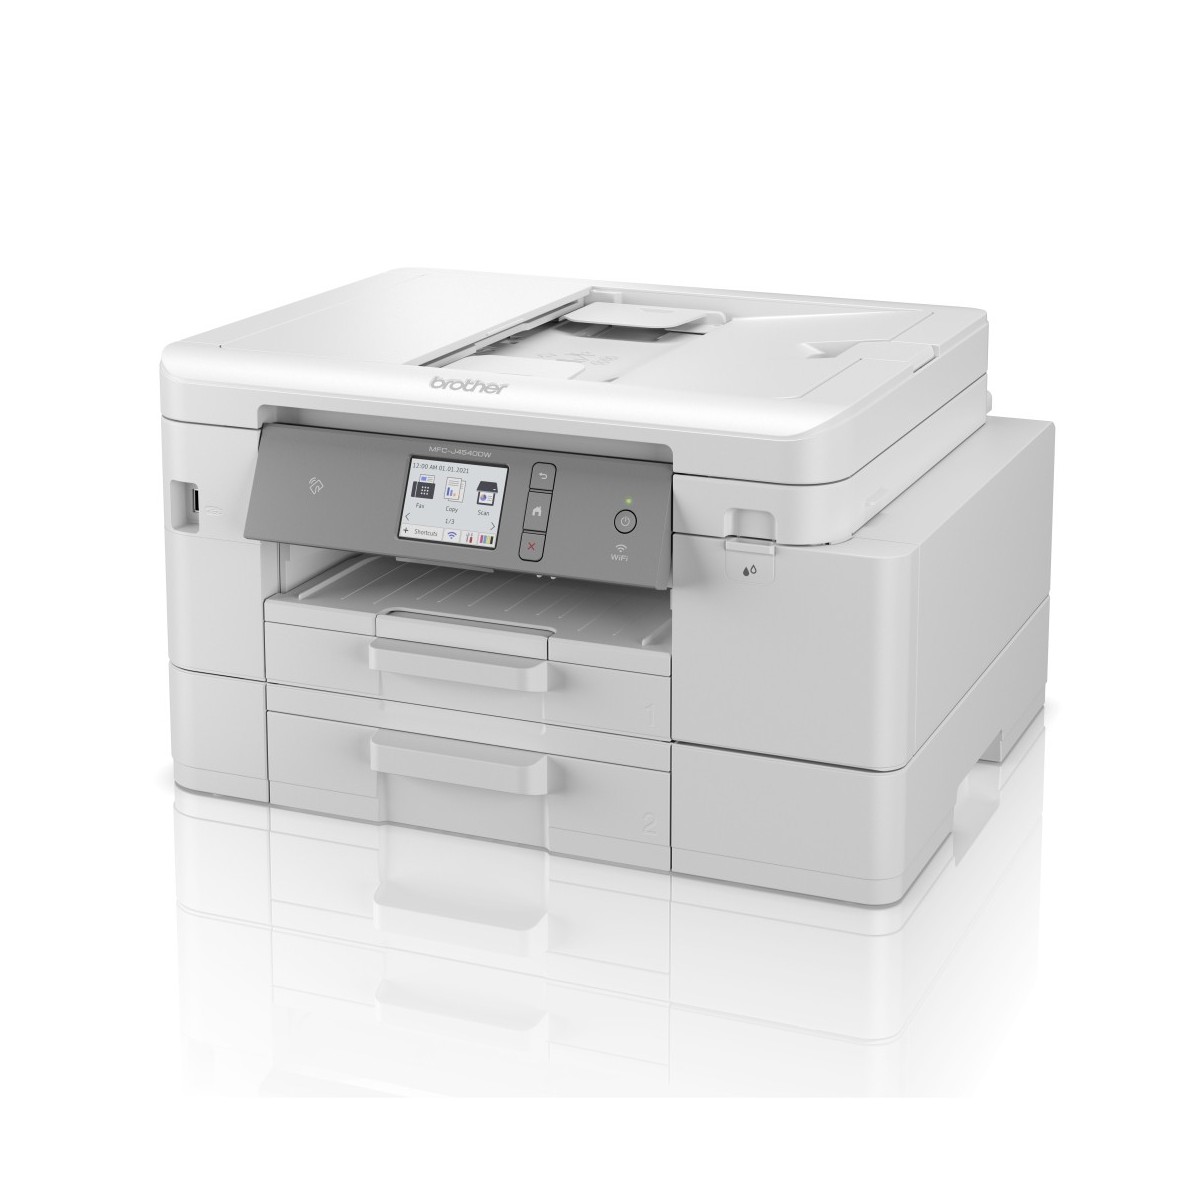 Brother MFC-J4540DW - Inkjet - Colour printing - 4800 x 1200 DPI - A4 - Direct printing - White